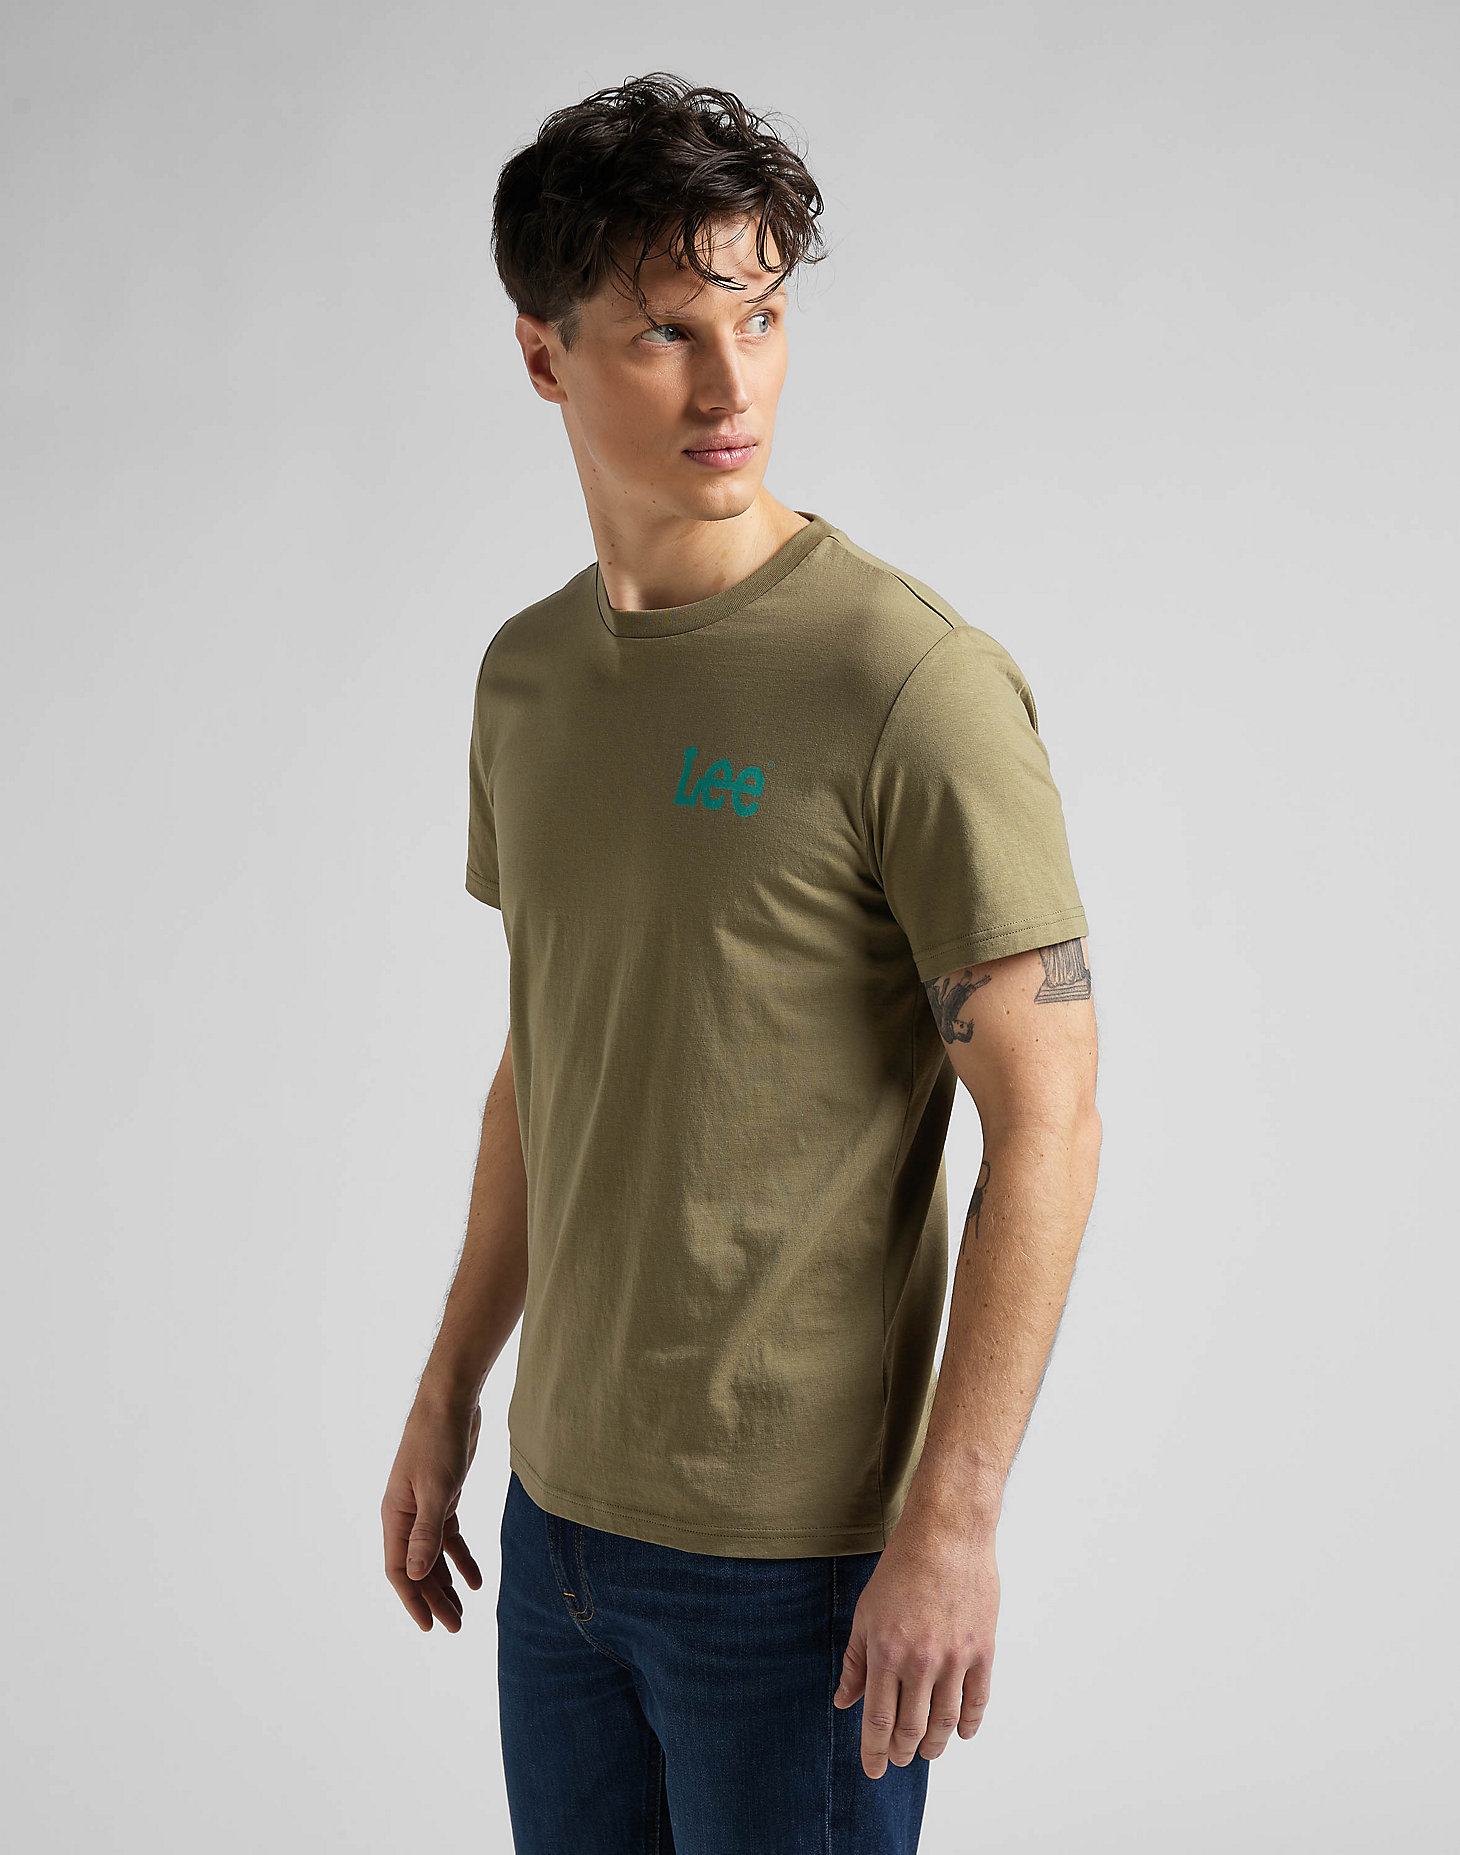 Wobbly Logo Tee in Brindle Green alternative view 3